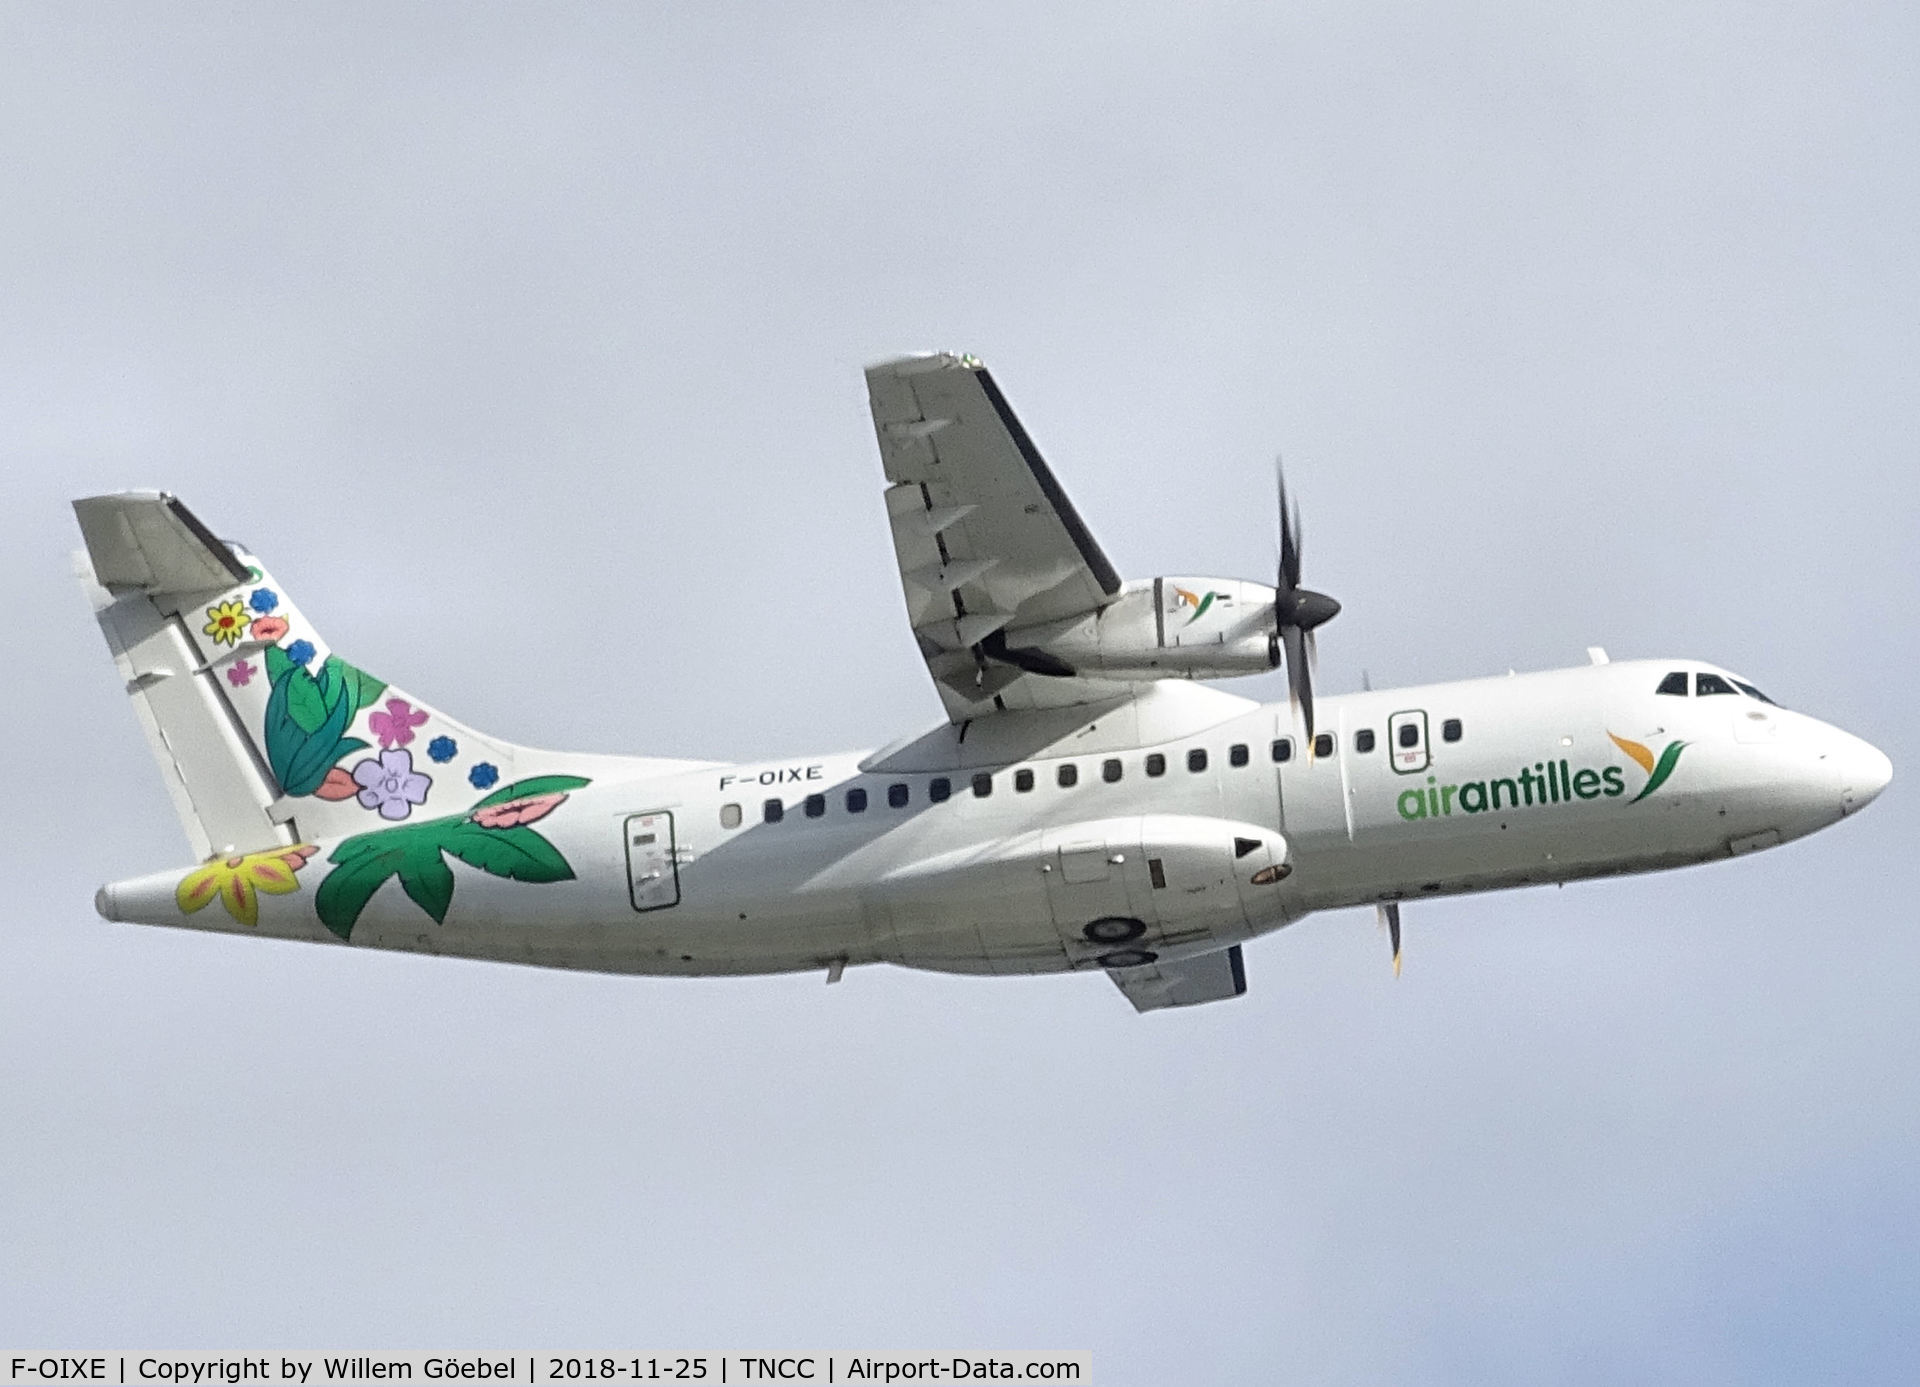 F-OIXE, 2009 ATR 42-500 C/N 807, Take off from Hato Airport